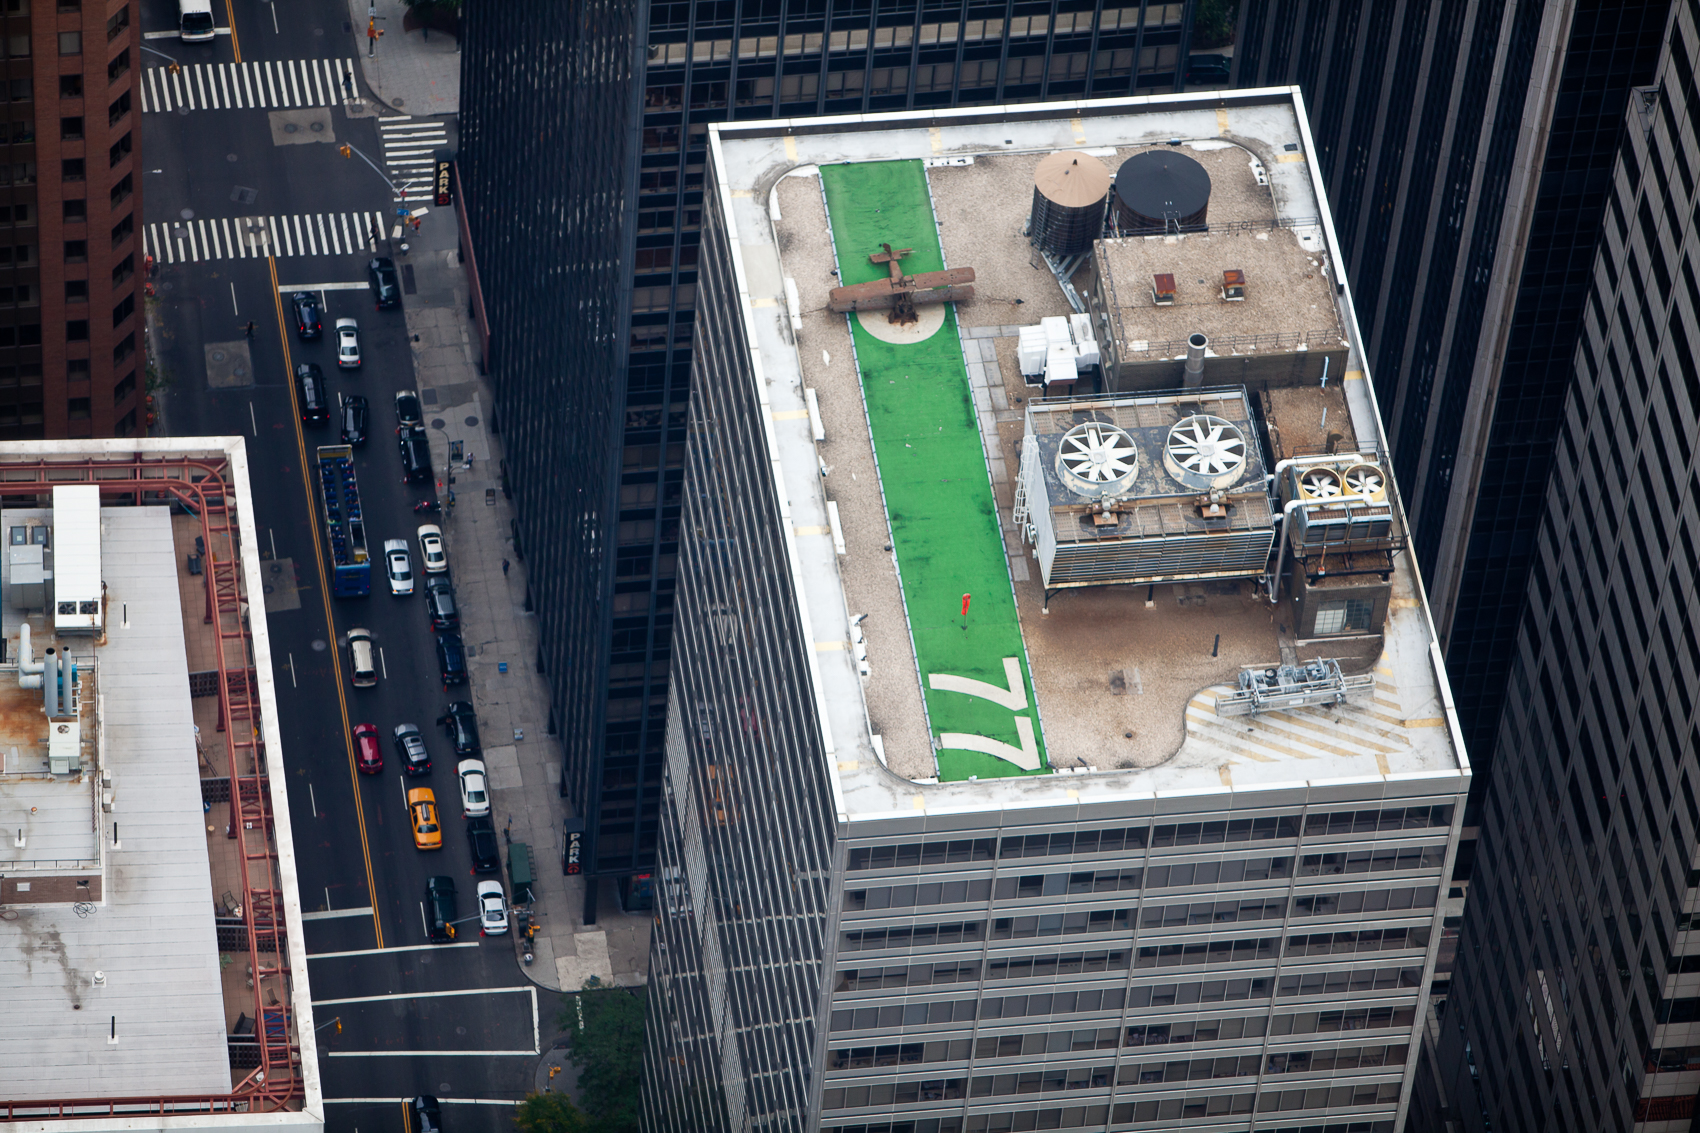 77 Water Street, Financial District, Manhattan: Model airplane permanently landed on green landing strip is a distraction from the rooftop mechanical units.